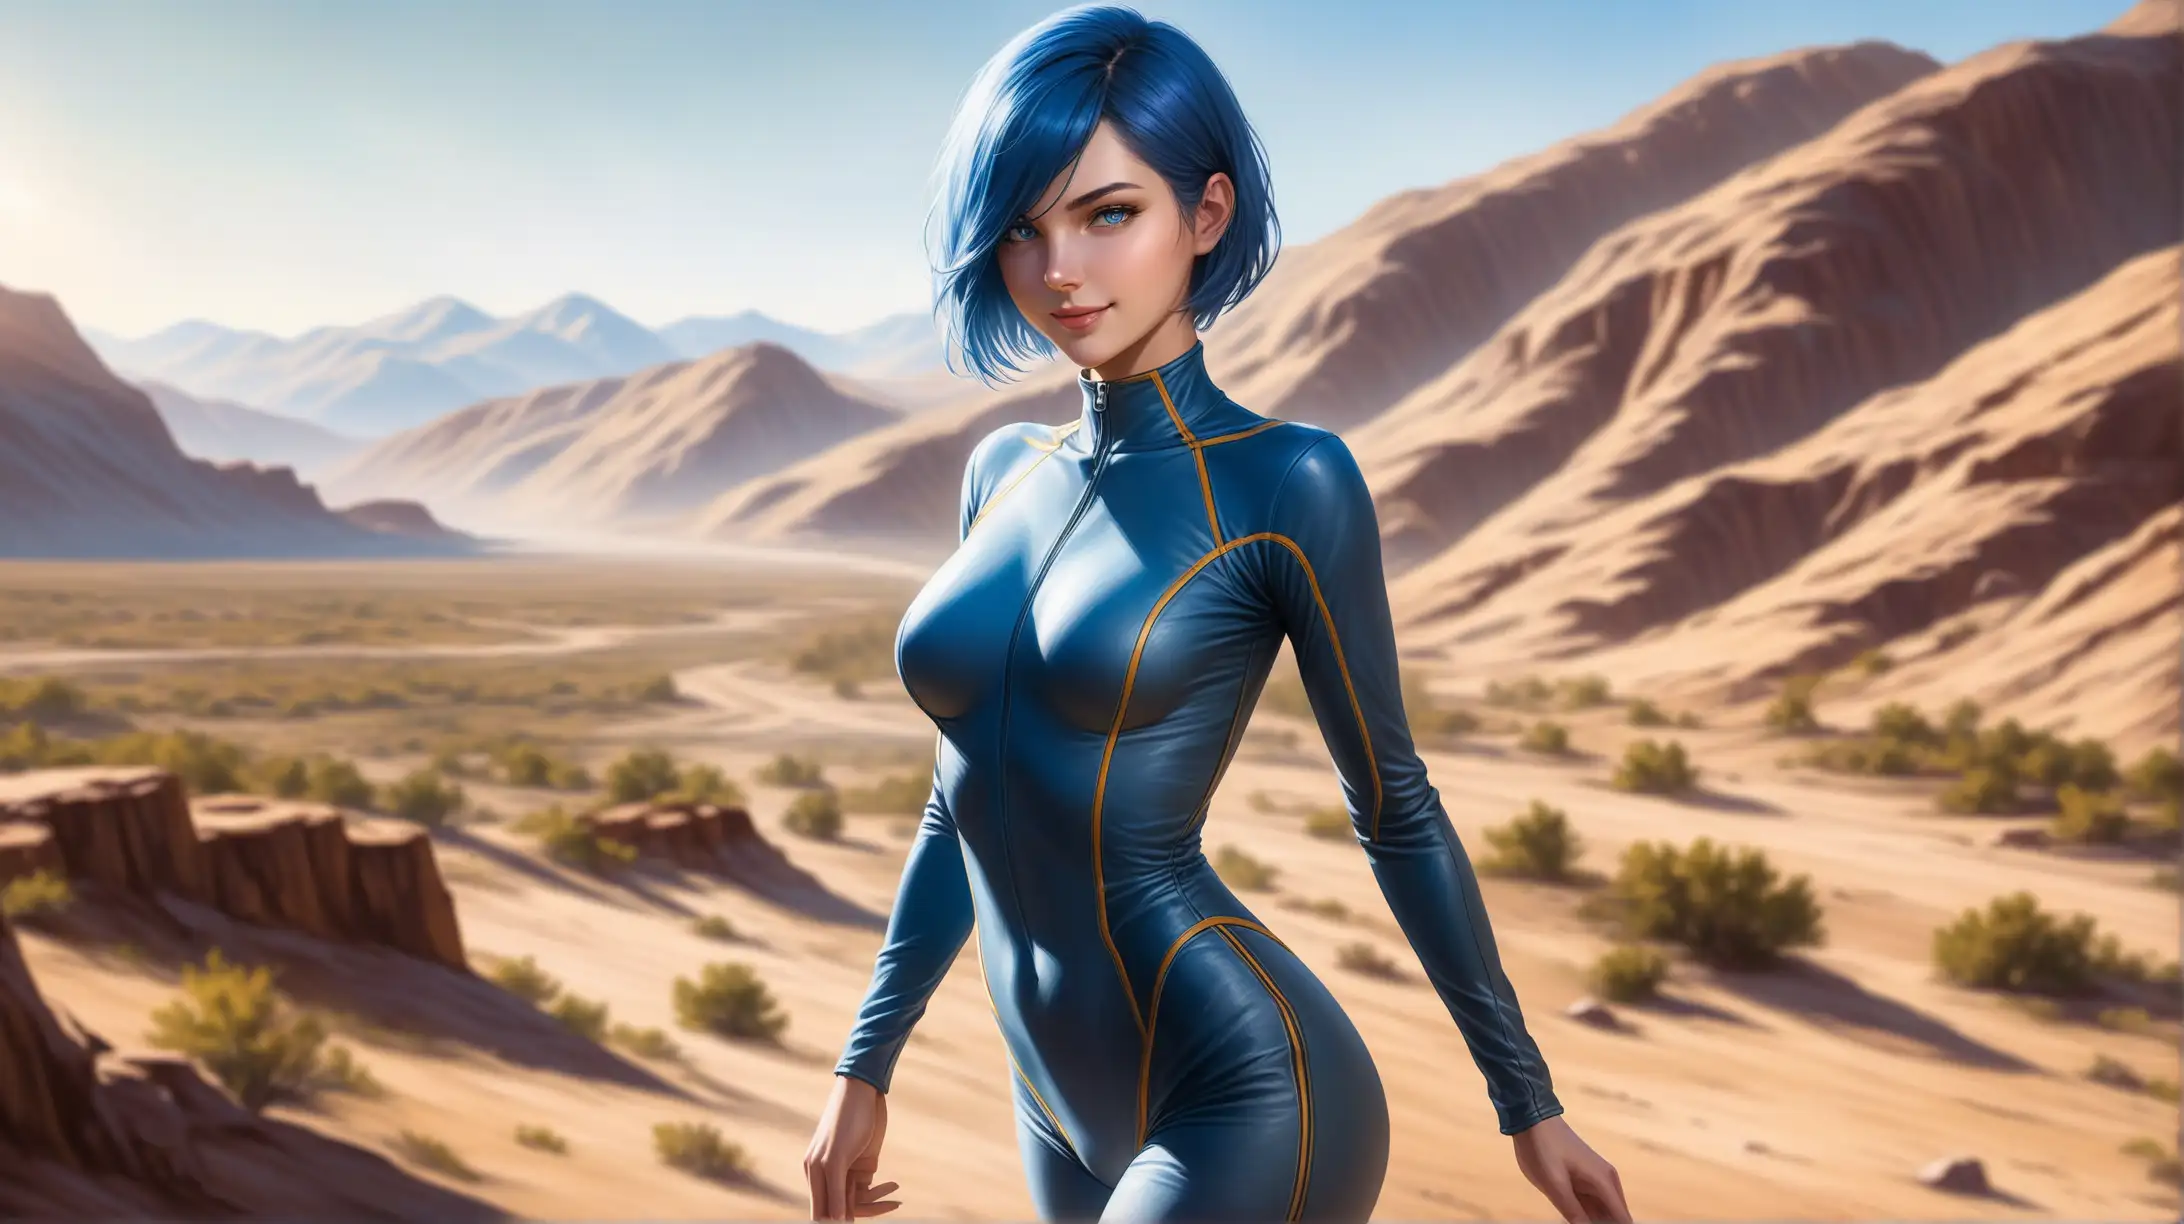 Seductive Woman with Blue Hair in Falloutinspired Outfit Smiling Outdoors